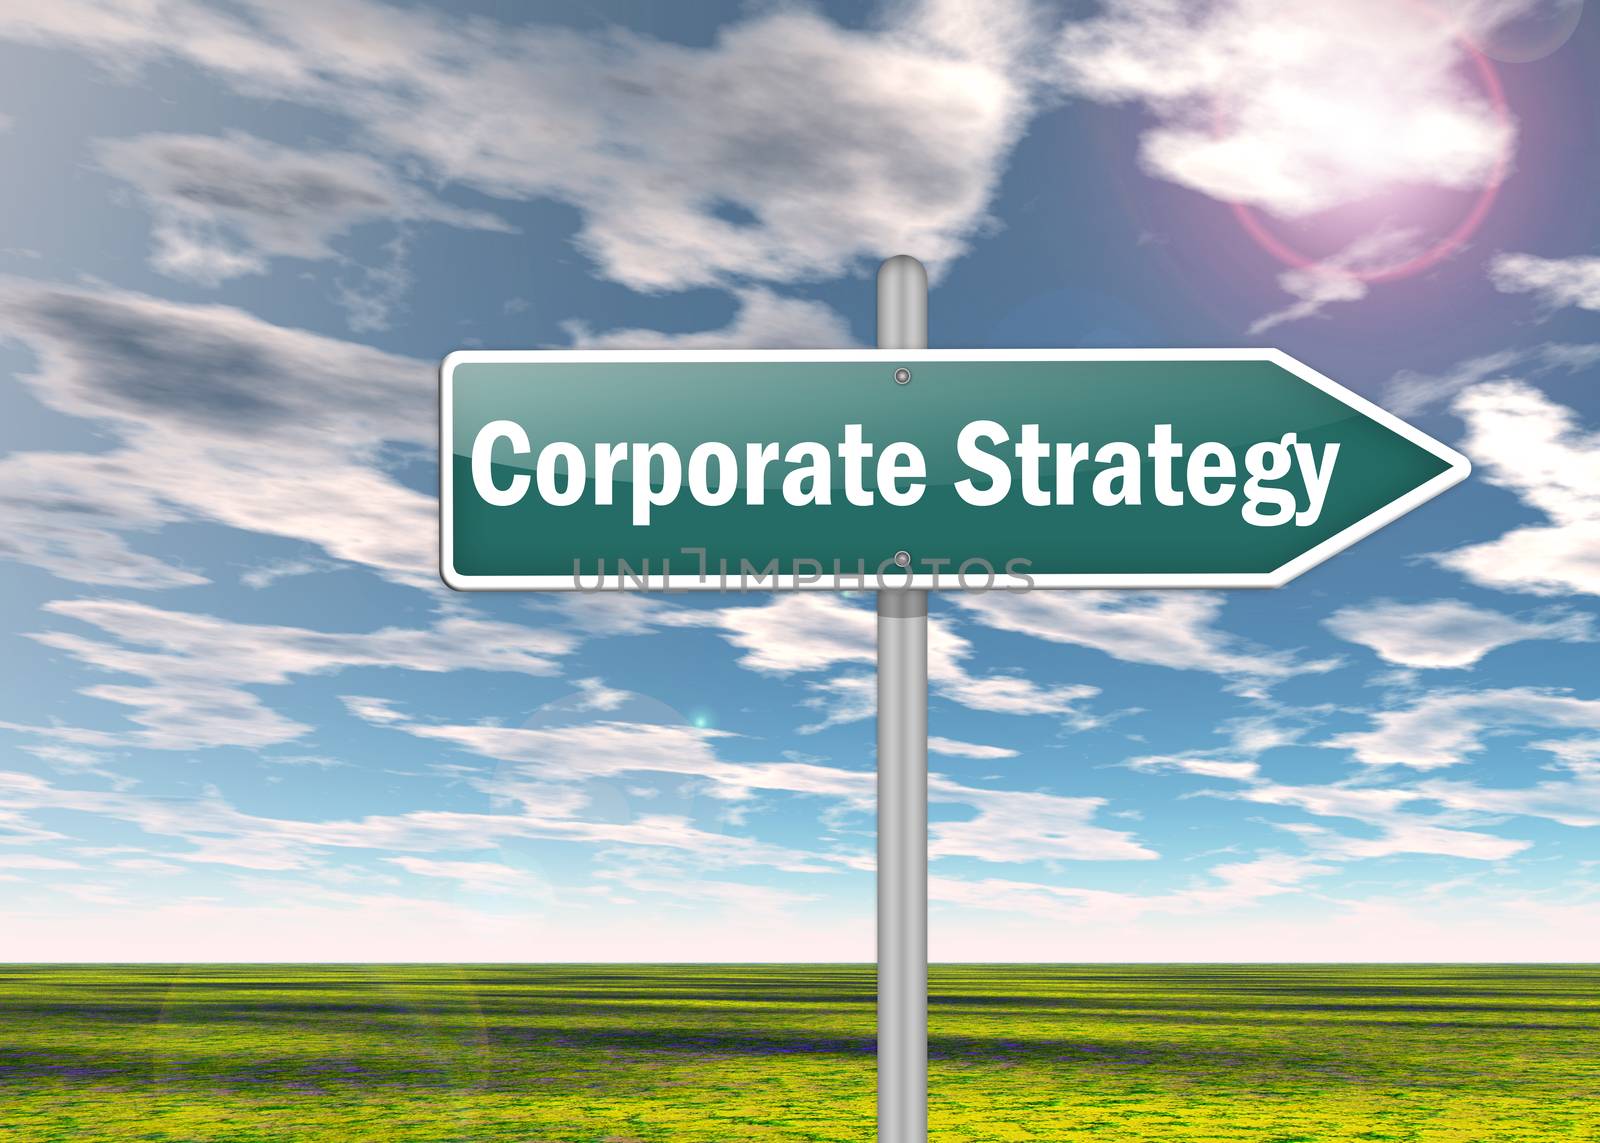 Signpost with Corporate Strategy wording